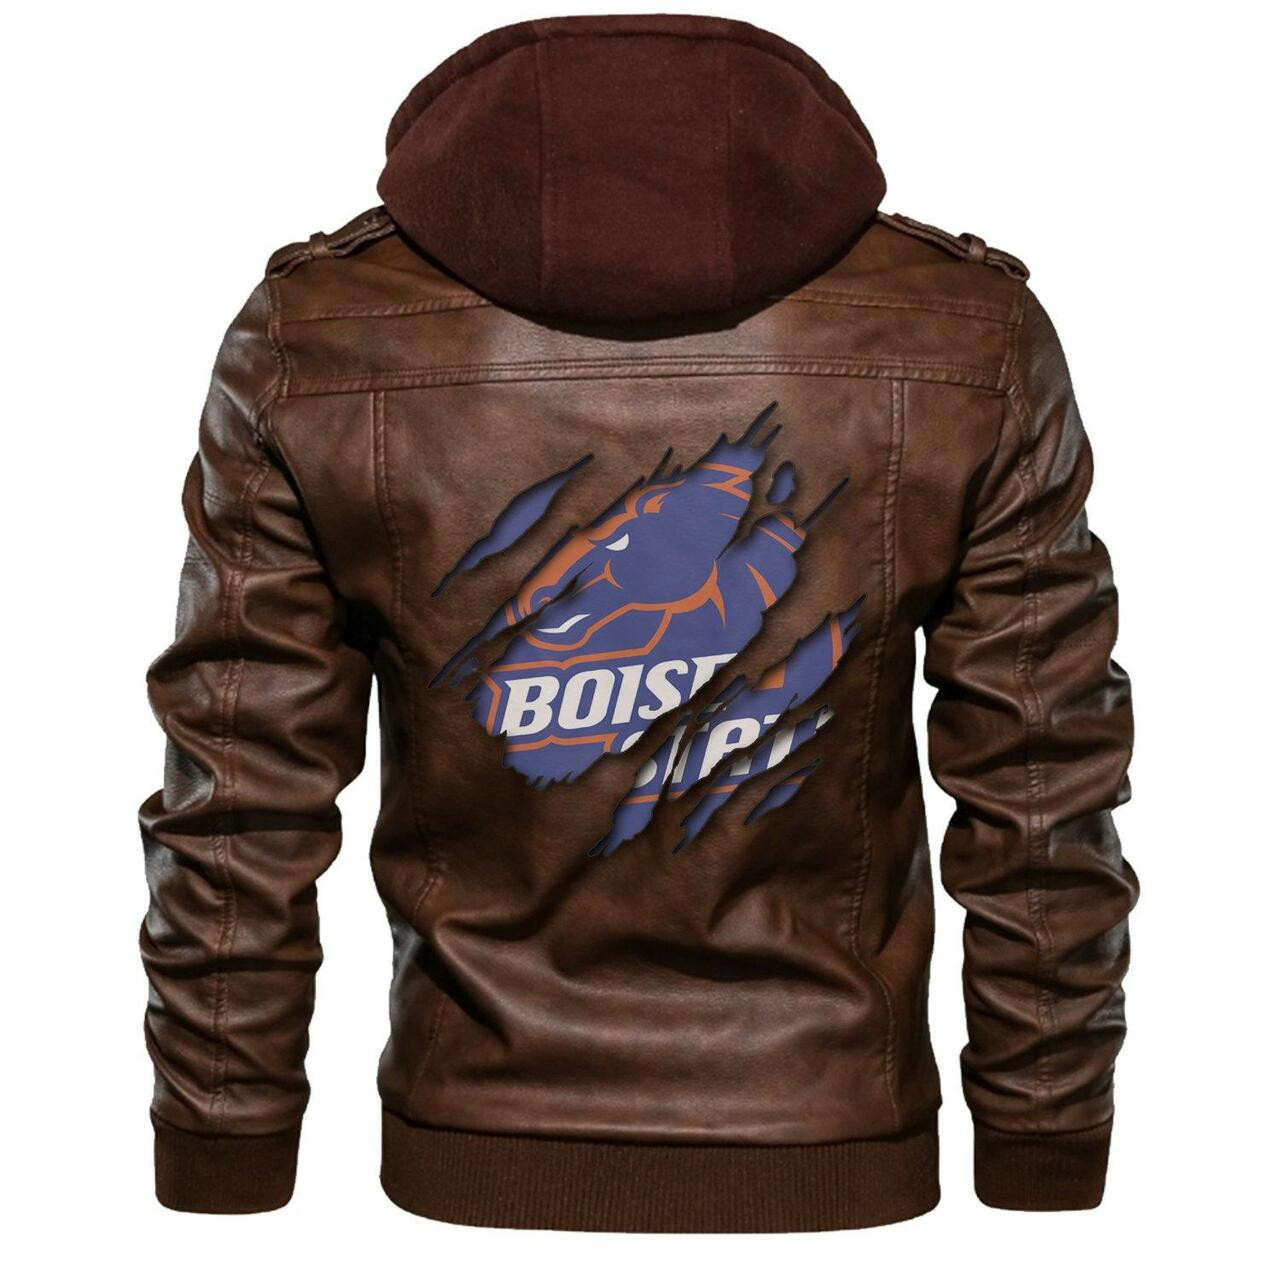 This leather Jacket will look great on you and make you stand out from the crowd 137